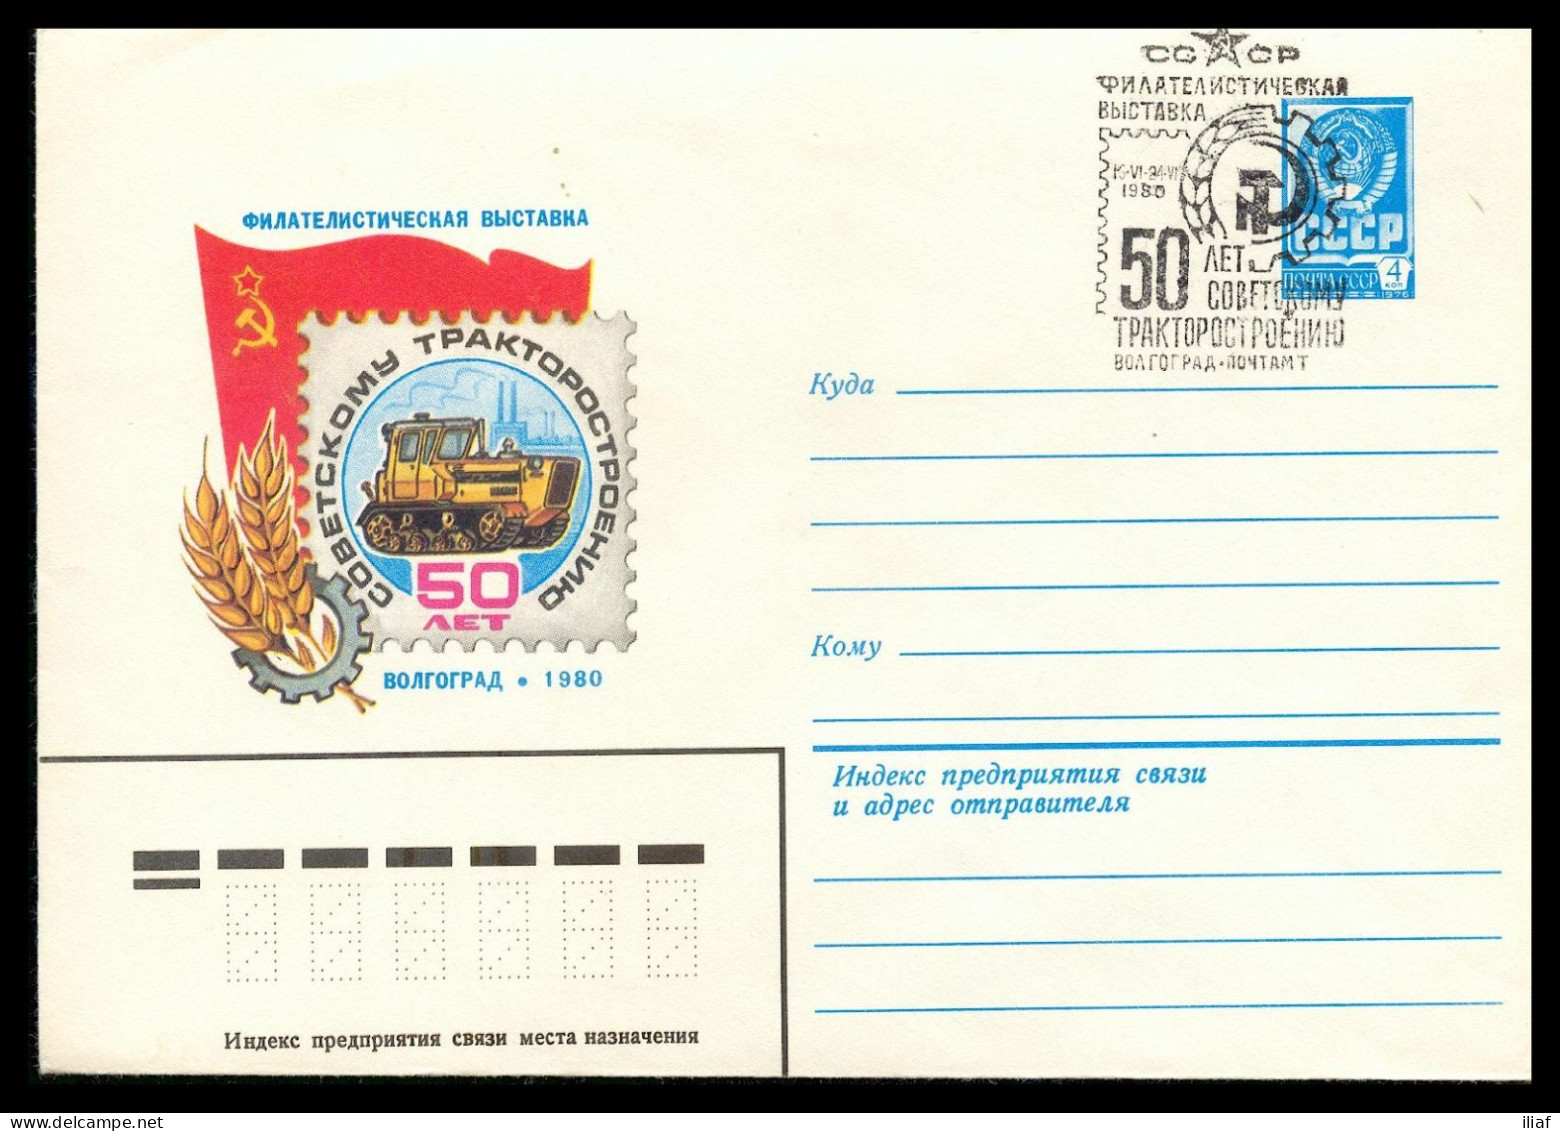 RUSSIA & USSR Philatelic Exhibition “50th Anniversary Of The Soviet Tractor Building” Envelope With Special Cancellation - Philatelic Exhibitions